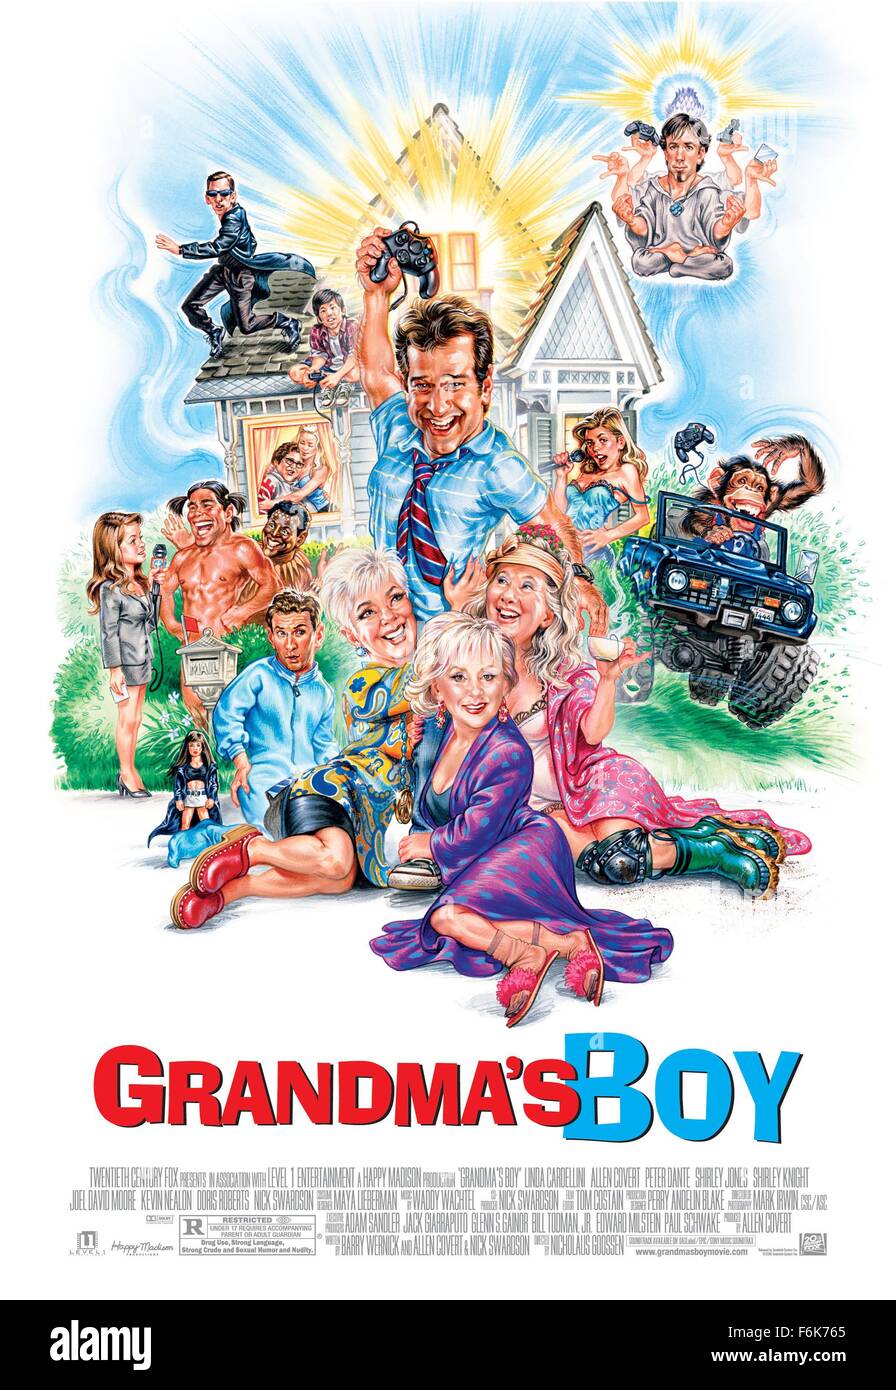 Jan 06, 2006; Hollywood, CA, USA; poster Art for the NICHOLAUS GOOSEN directed comedy 'Grandma's Boy' starring ALLEN COVERT as Alex. Mandatory Credit: Photo by Happy Madison Prod.. (Ac) Copyright 2006 by Courtesy of Happy Madison Prod. Stock Photo